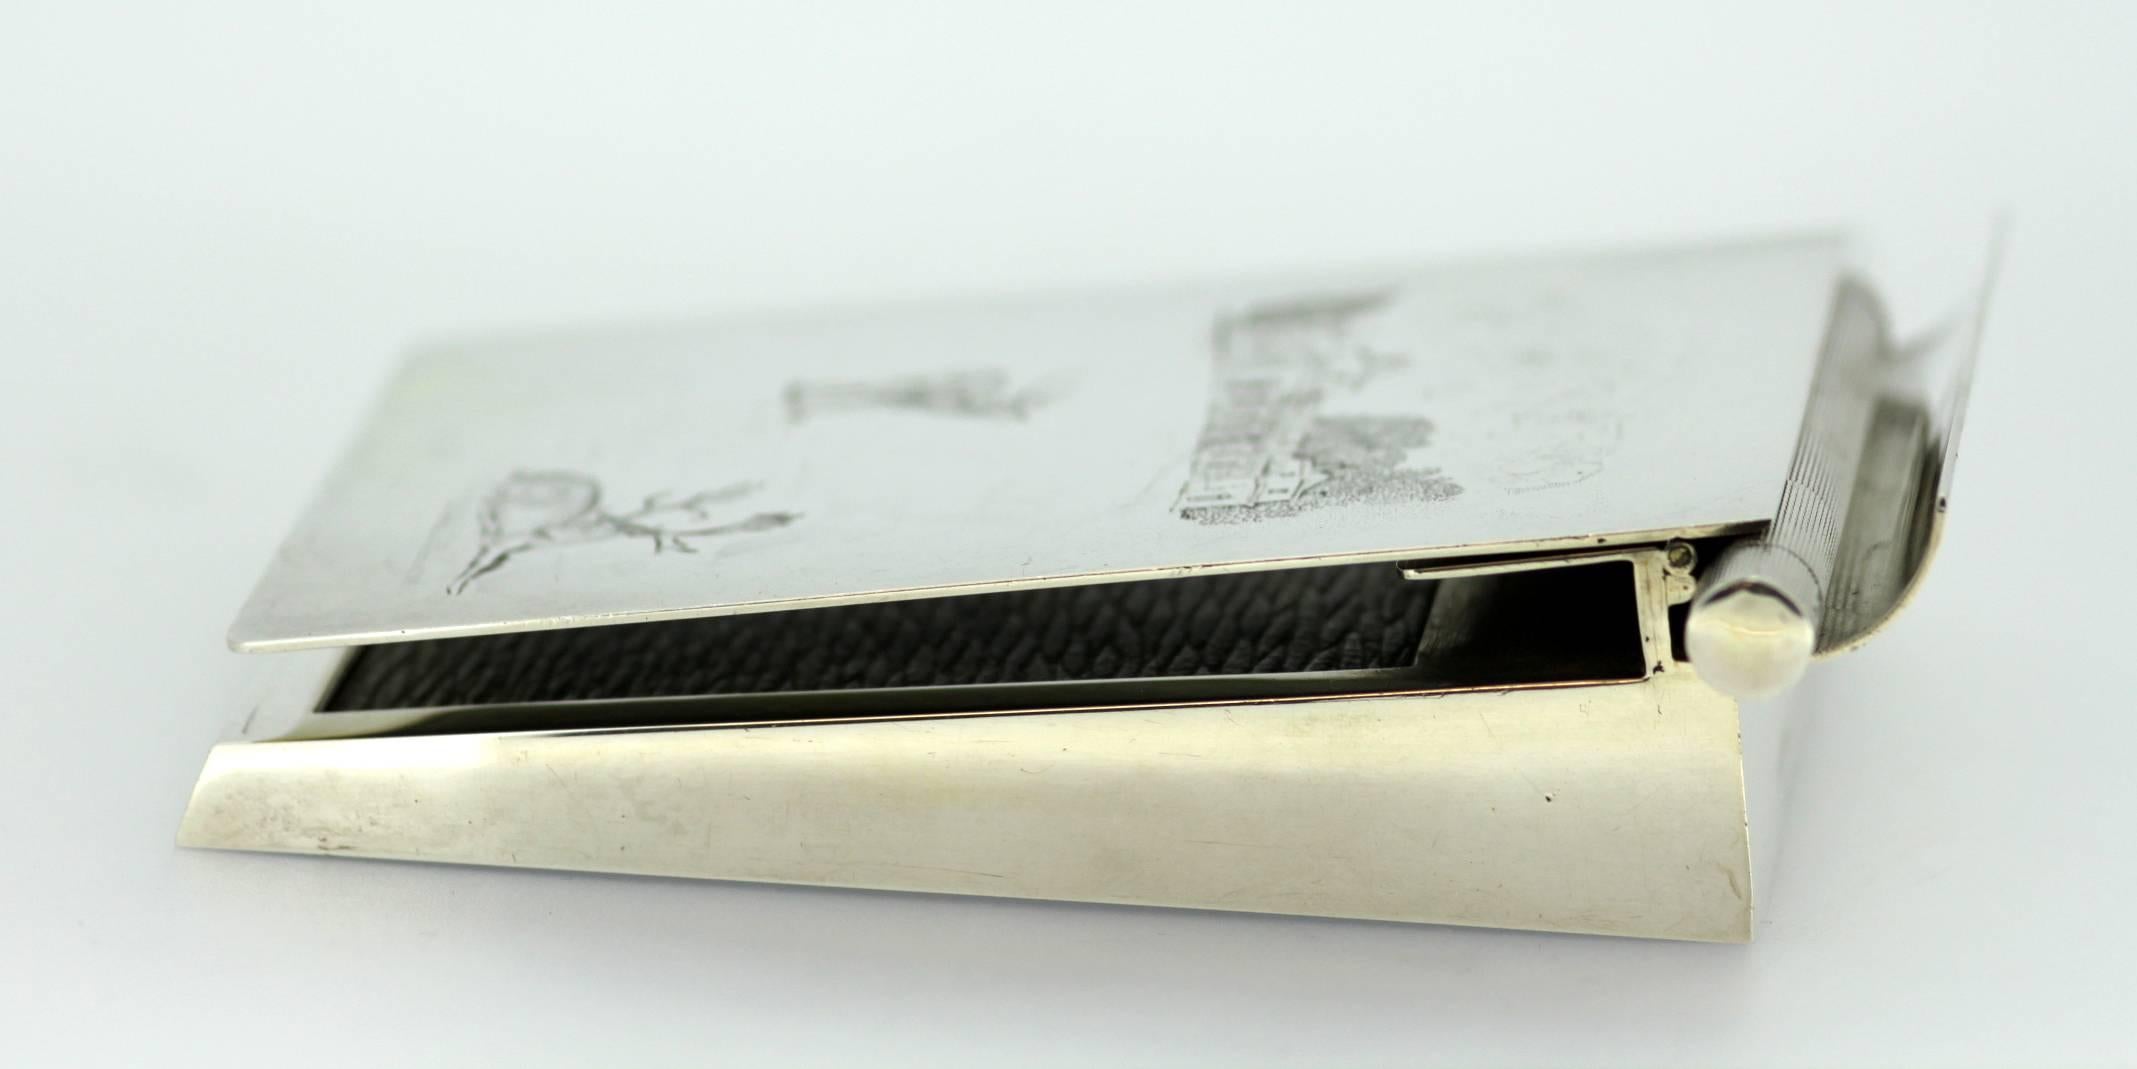 Great Britain (UK) Silver Notepad and Pen, Asprey & Co, Engraved By J.Purdey & Sons, London 1960